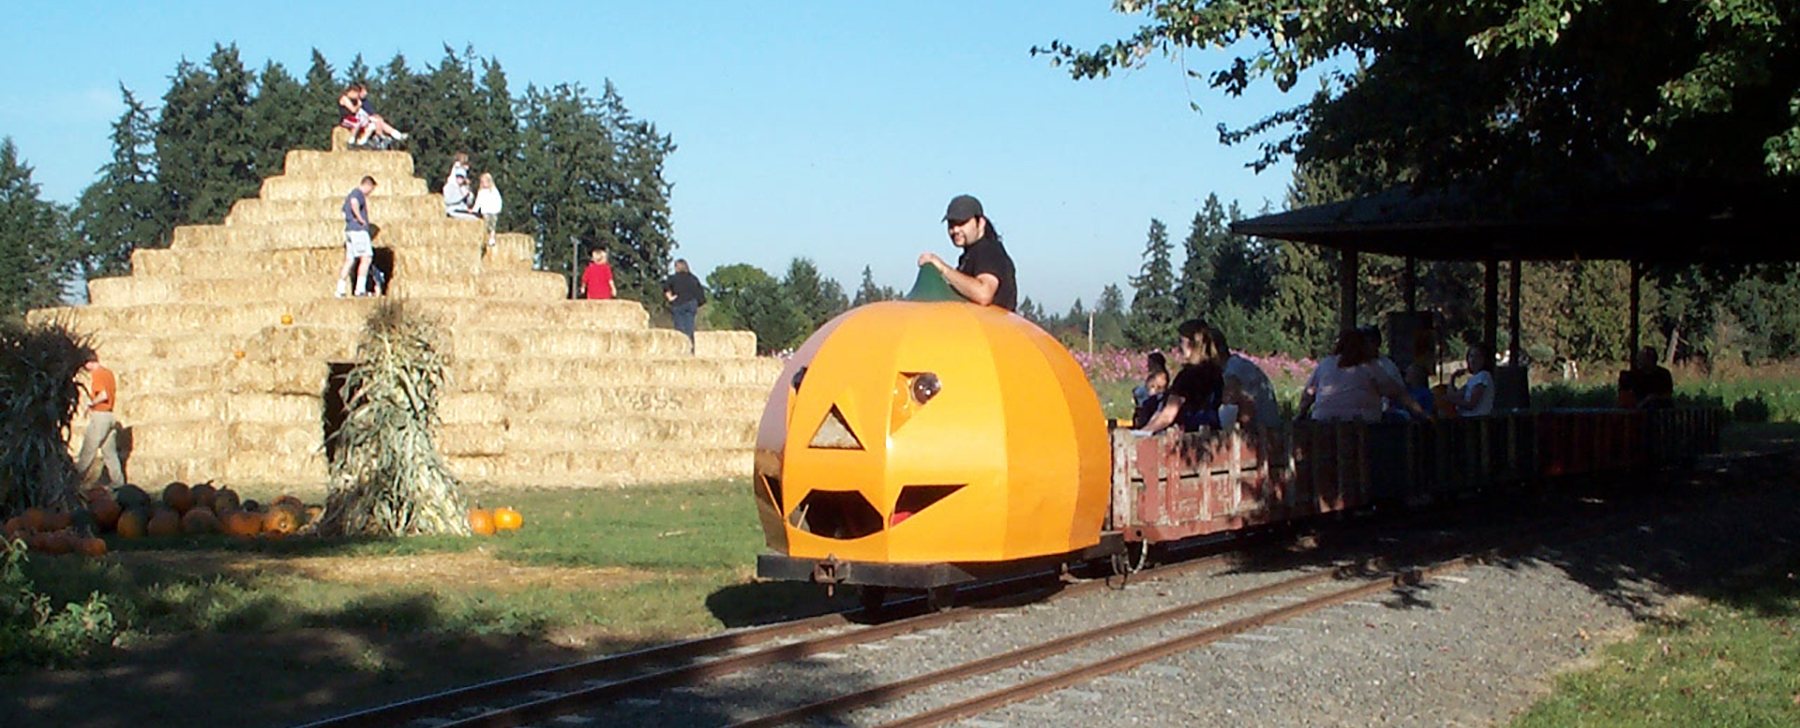 boo train in front of the hay tower